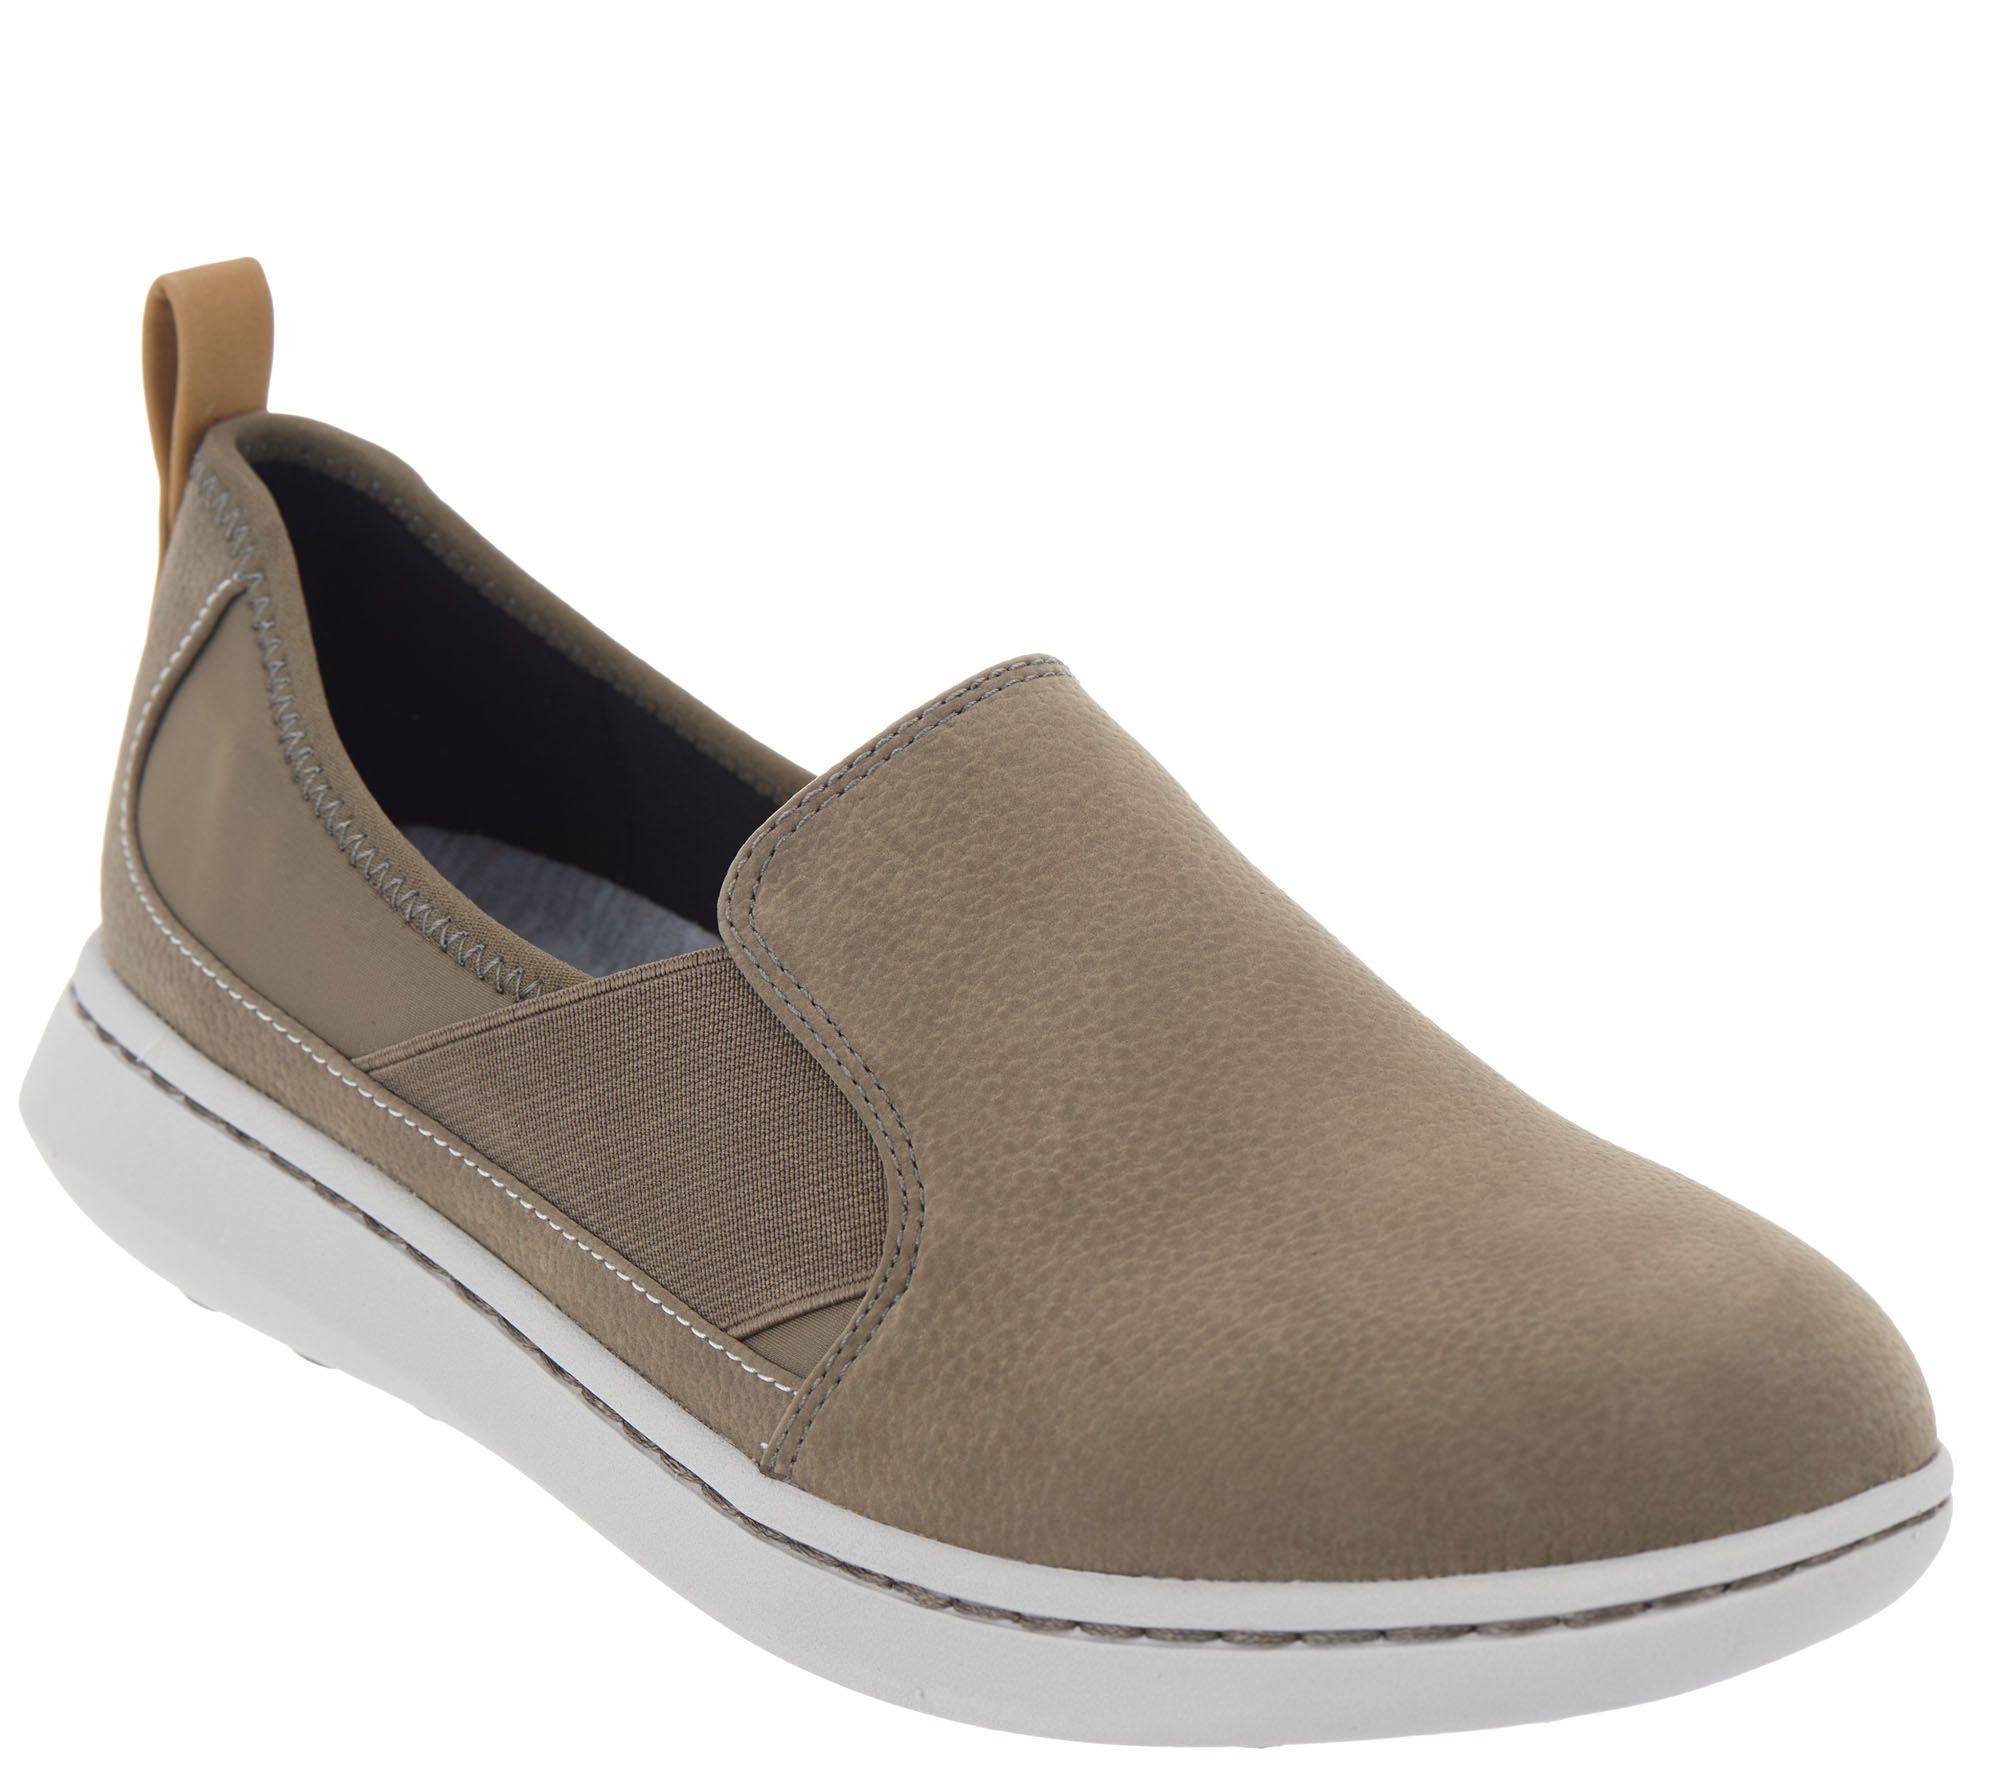 CLOUDSTEPPERS by Clarks Slip-on Shoes 